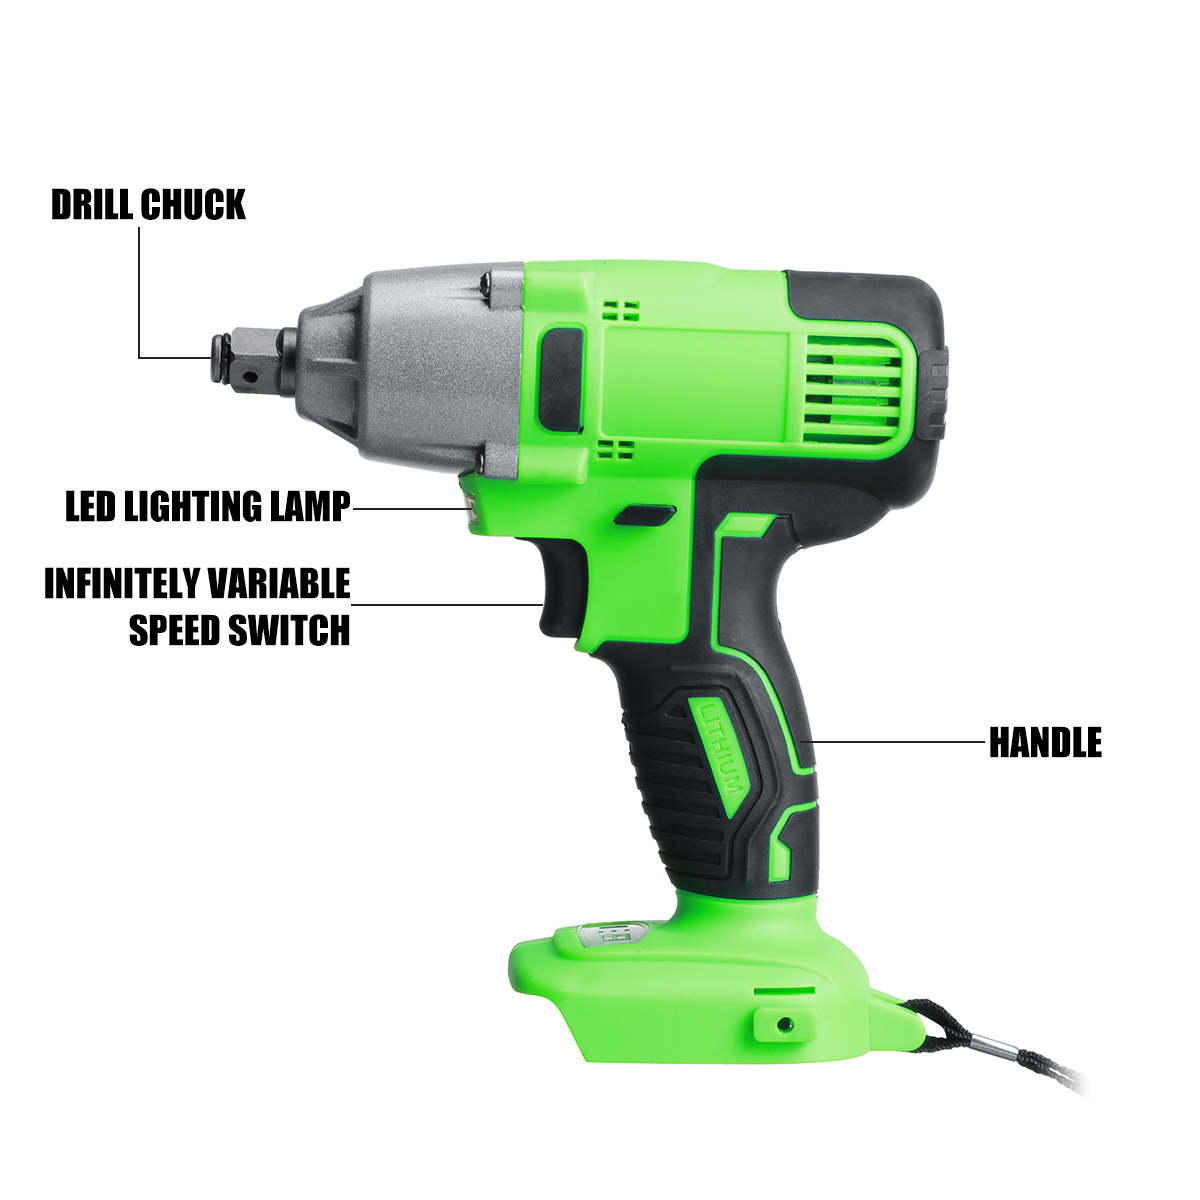 650NM-1600W-Brushless-Cordless-Electric-Drill-Screwdriver-For-Makita-18V-Battety-1783492-3